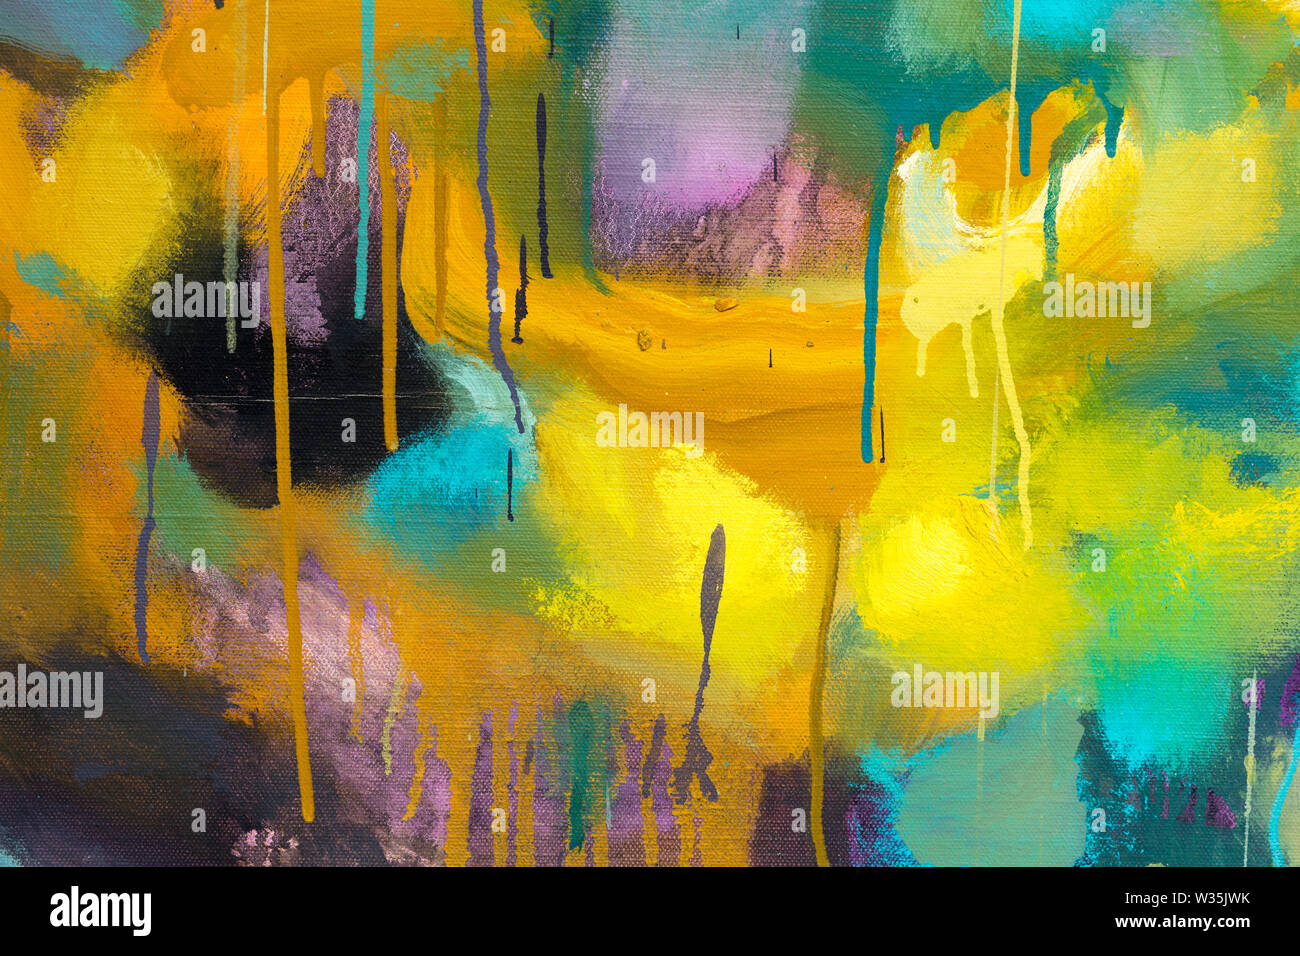 Bright colorful contrast abstract paint in excellent yellow, orange, blue tones. Stock Photo